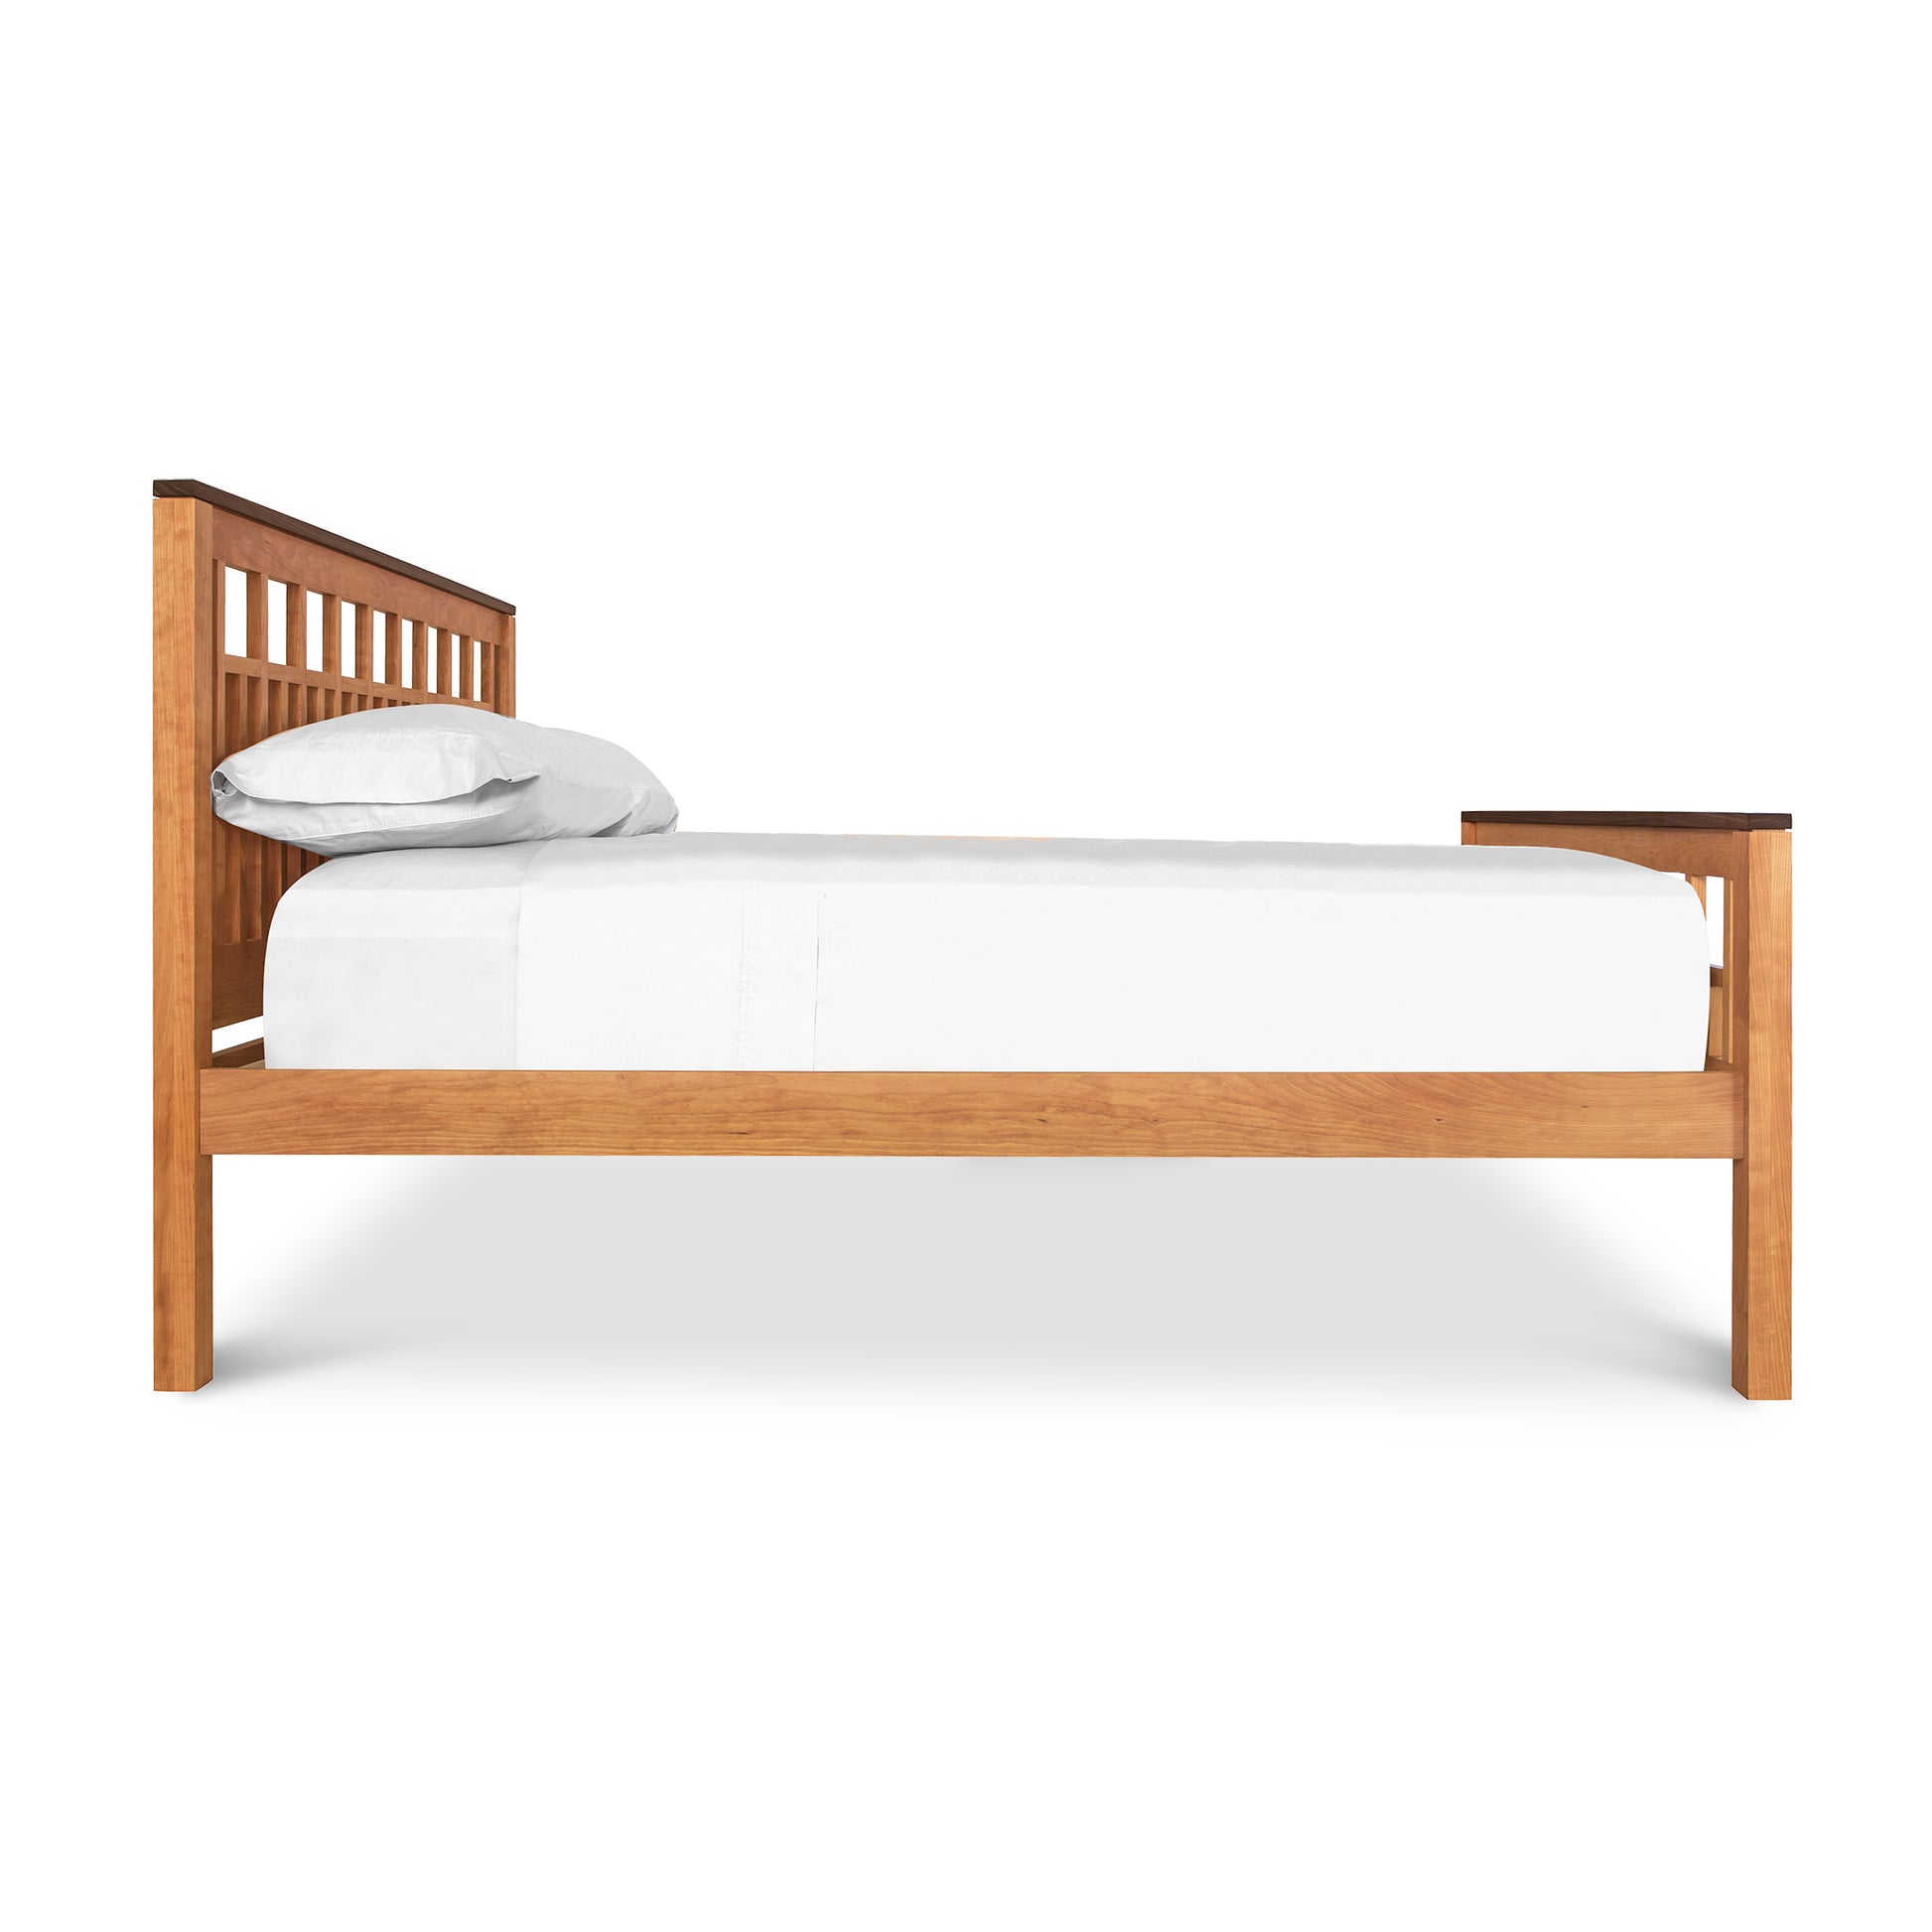 A Vermont Furniture Designs Modern American Trellis Bed, crafted from solid hardwoods with eco-friendly finish, featuring white bedding and a single pillow, isolated on a white background.